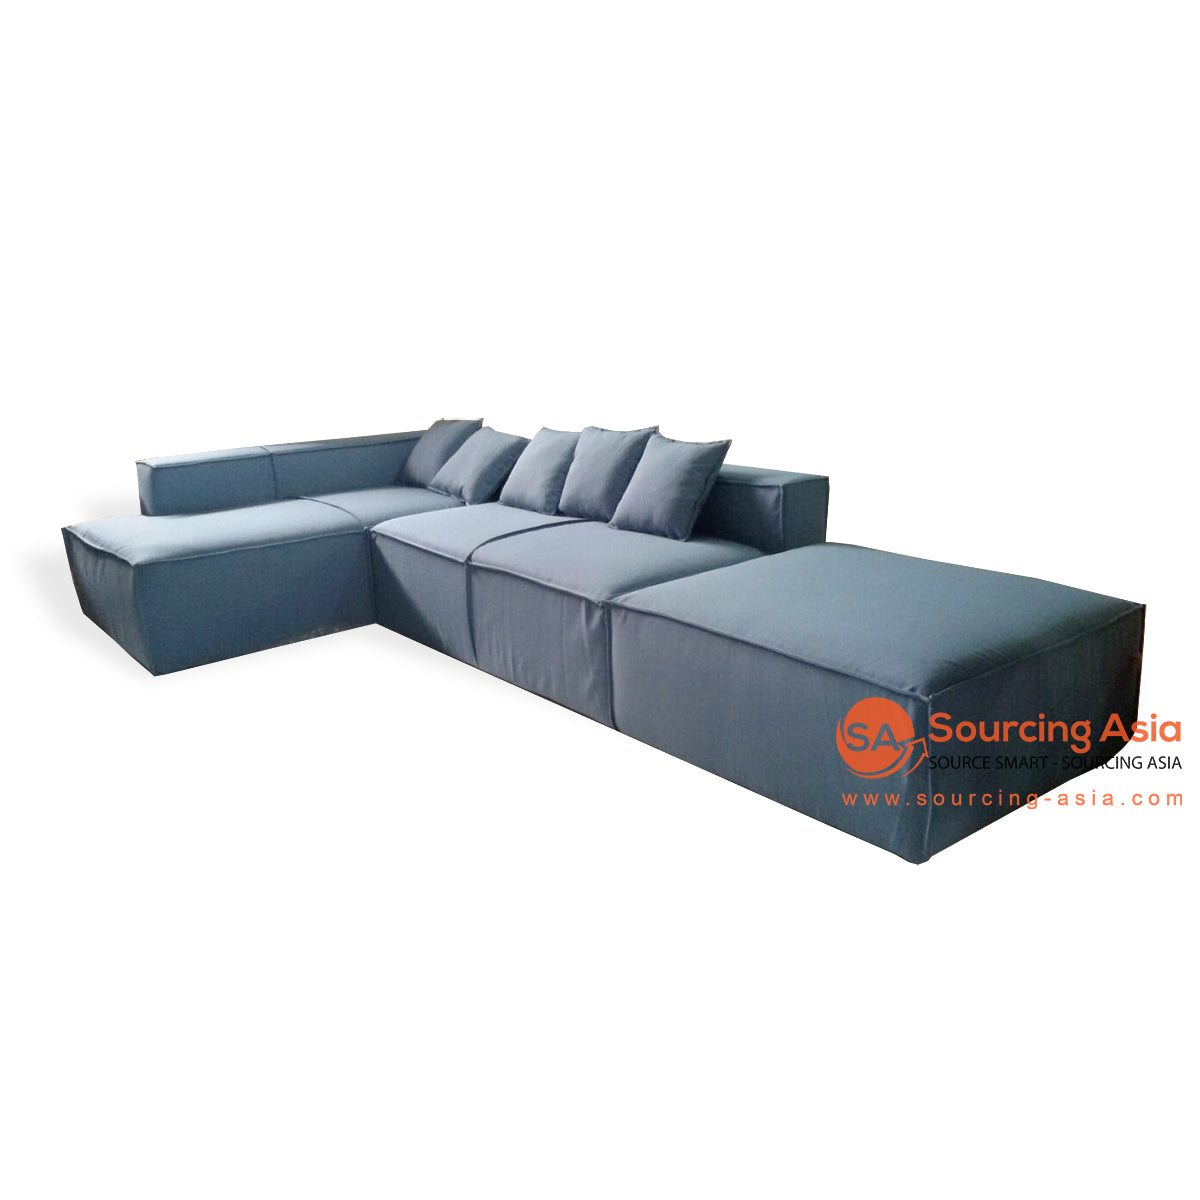 CCM016 BLUE DENIM SUNPROOF L SHAPE INDOOR LOUNGER SOFA WITH INSERT FOAM AND CUSHIONS (PRICE WITHOUT CUSHION)